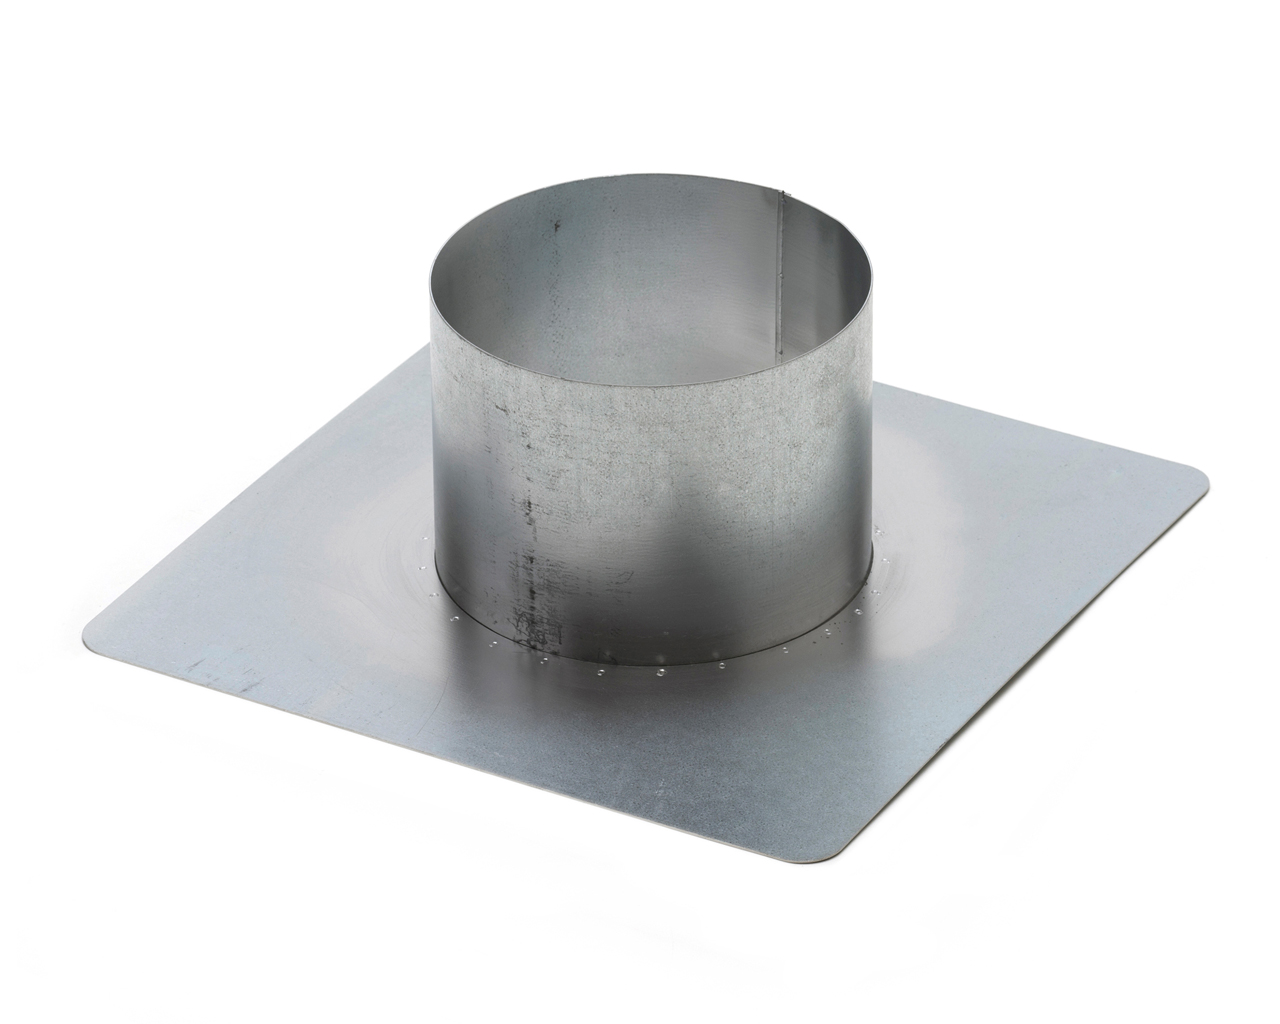 PLPL1.050 Wall plate take-off type 1 (PLPL1) The PLPL1 Wall plate take-off type 1 is a welded plate with on one side a raised welded opening that is around 20 mm larger than the duct diameter.